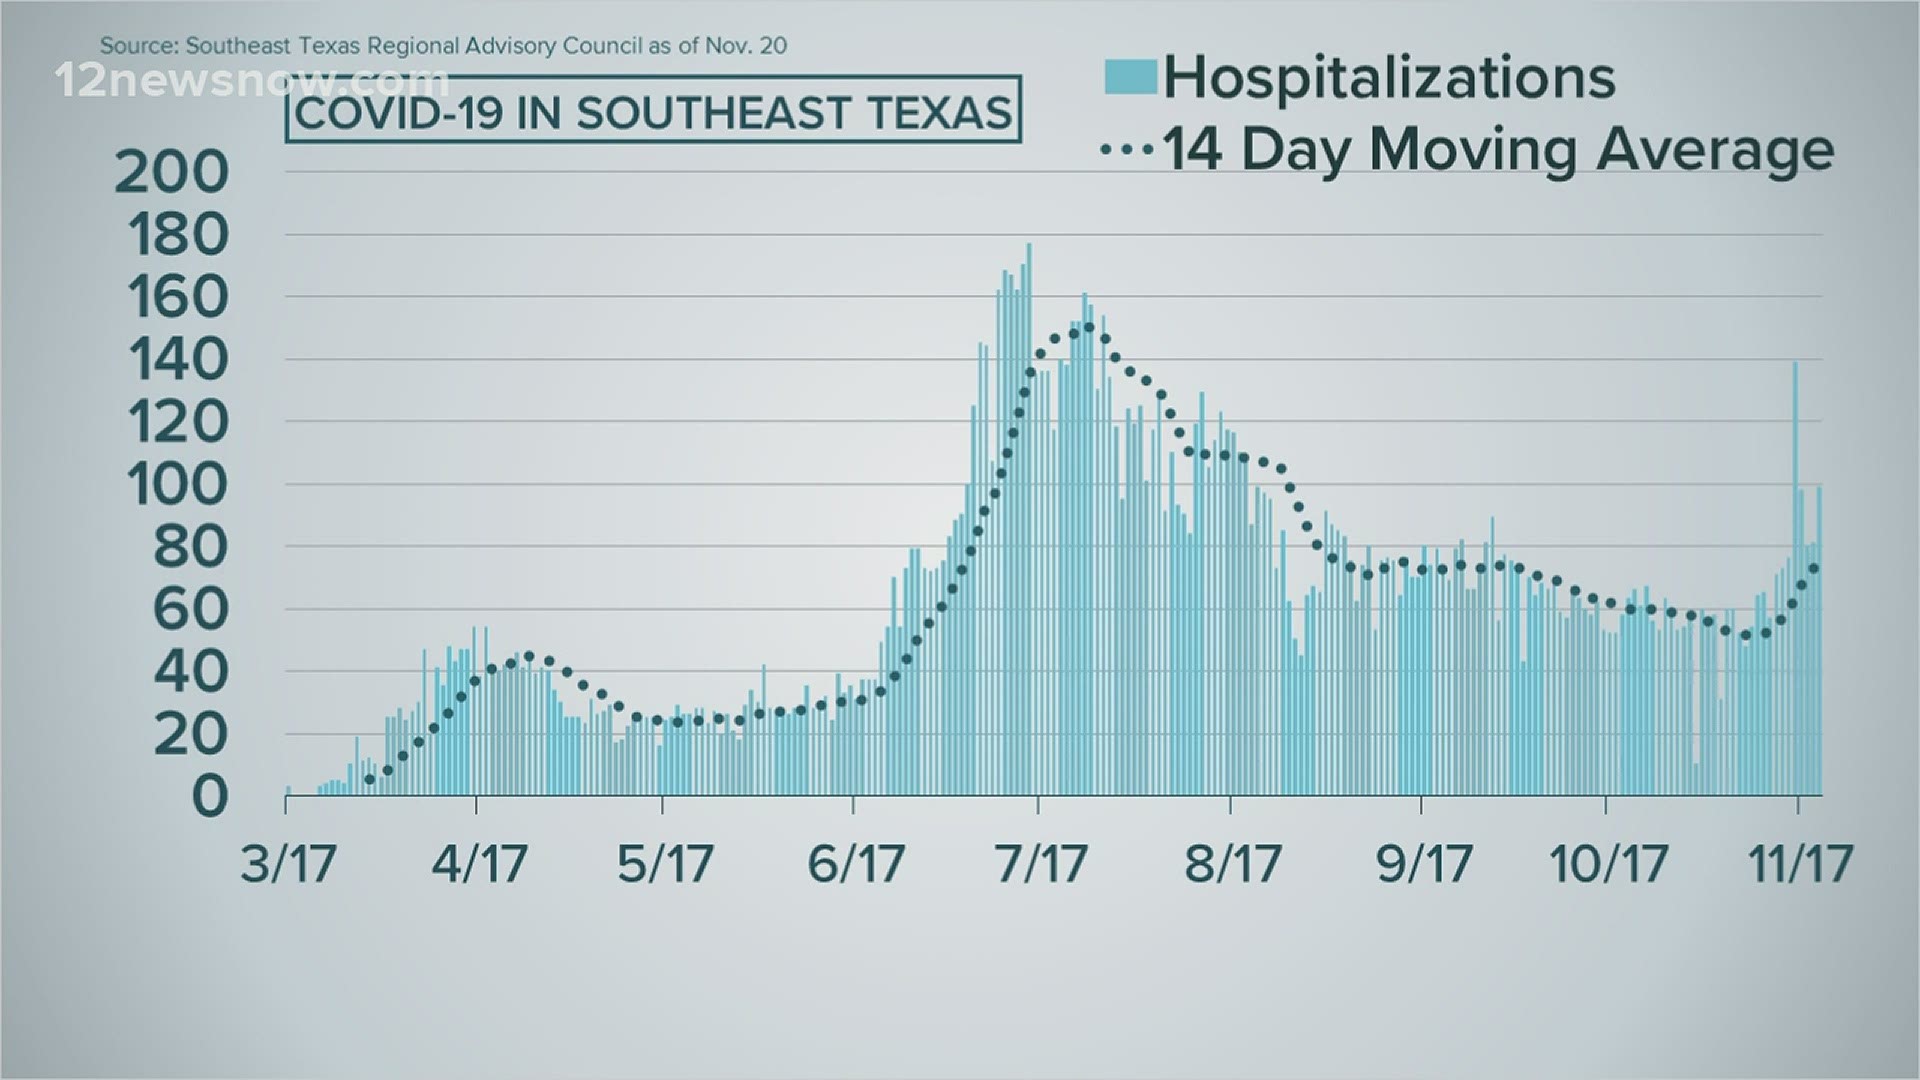 Our regional hospitalization rate is now at 11.9 percent.